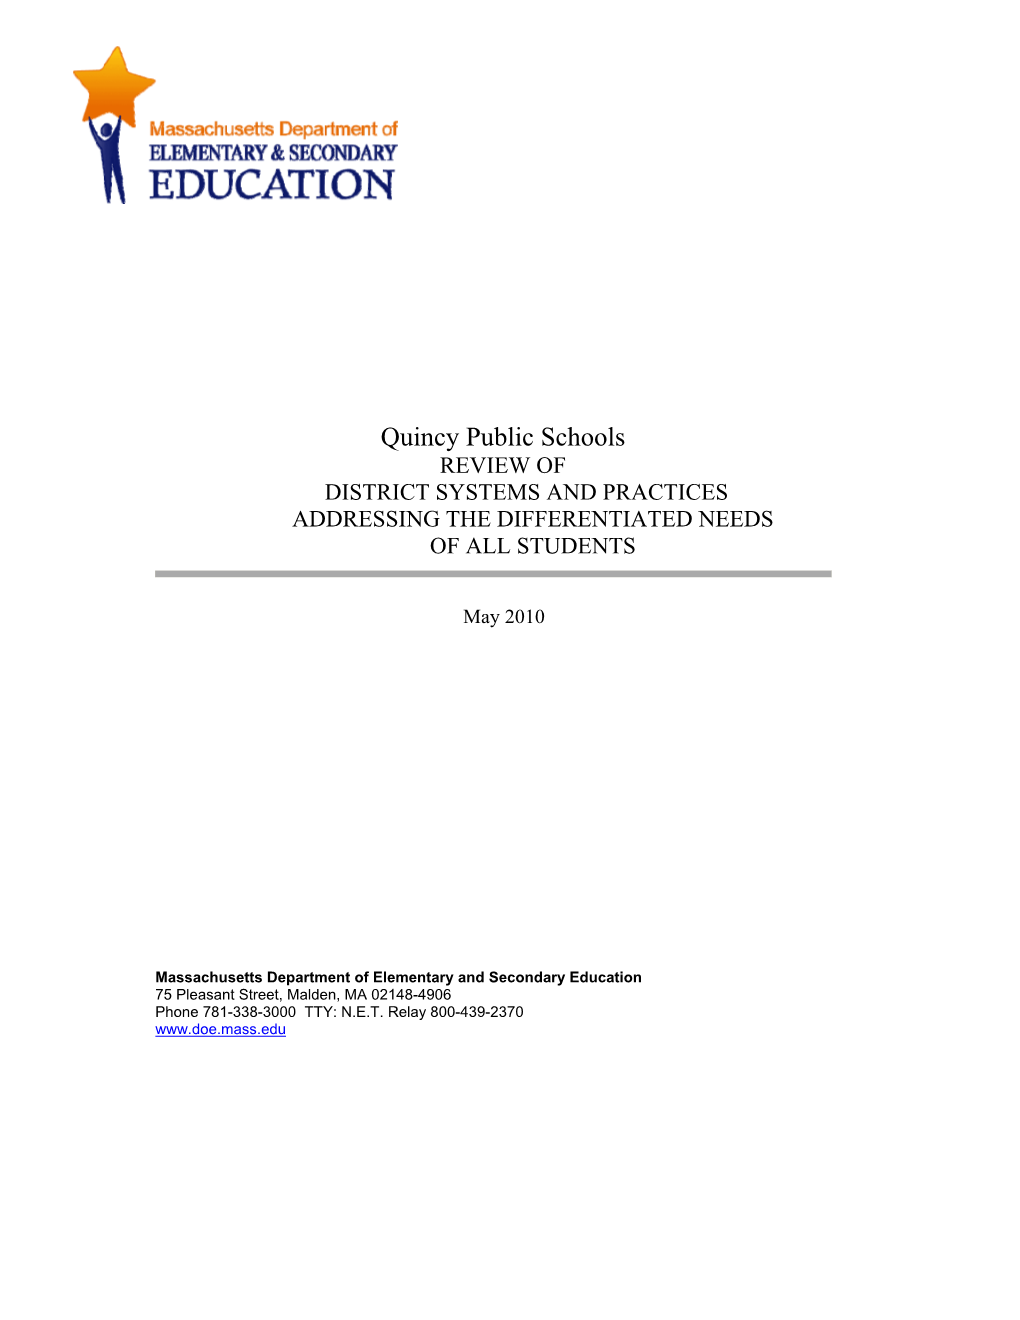 Quincy Public Schools Differentiated Needs Review Report, May 2010